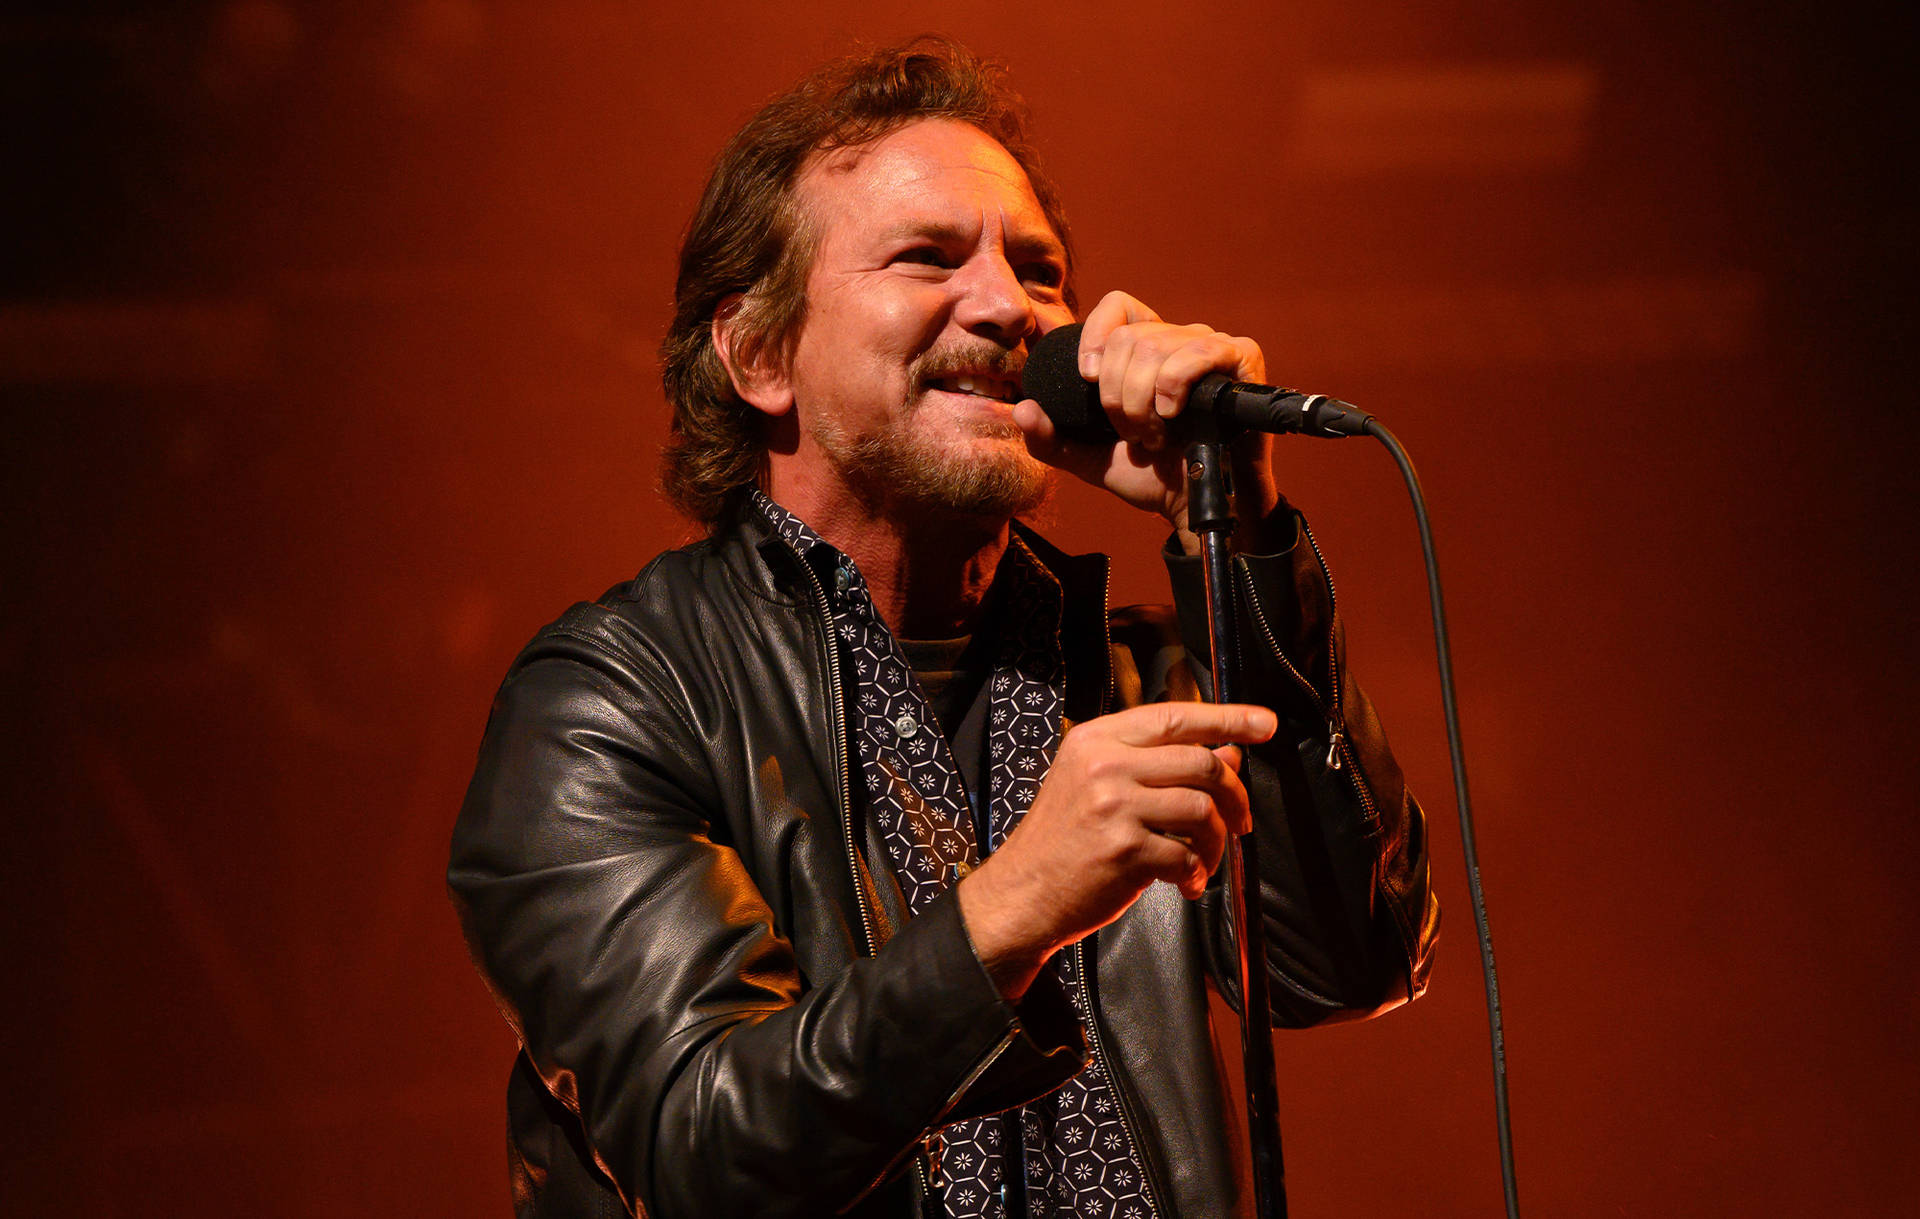 Caption: Iconic Pearl Jam's Lead Vocalist, Eddie Vedder In Live Rock Band Performance Background